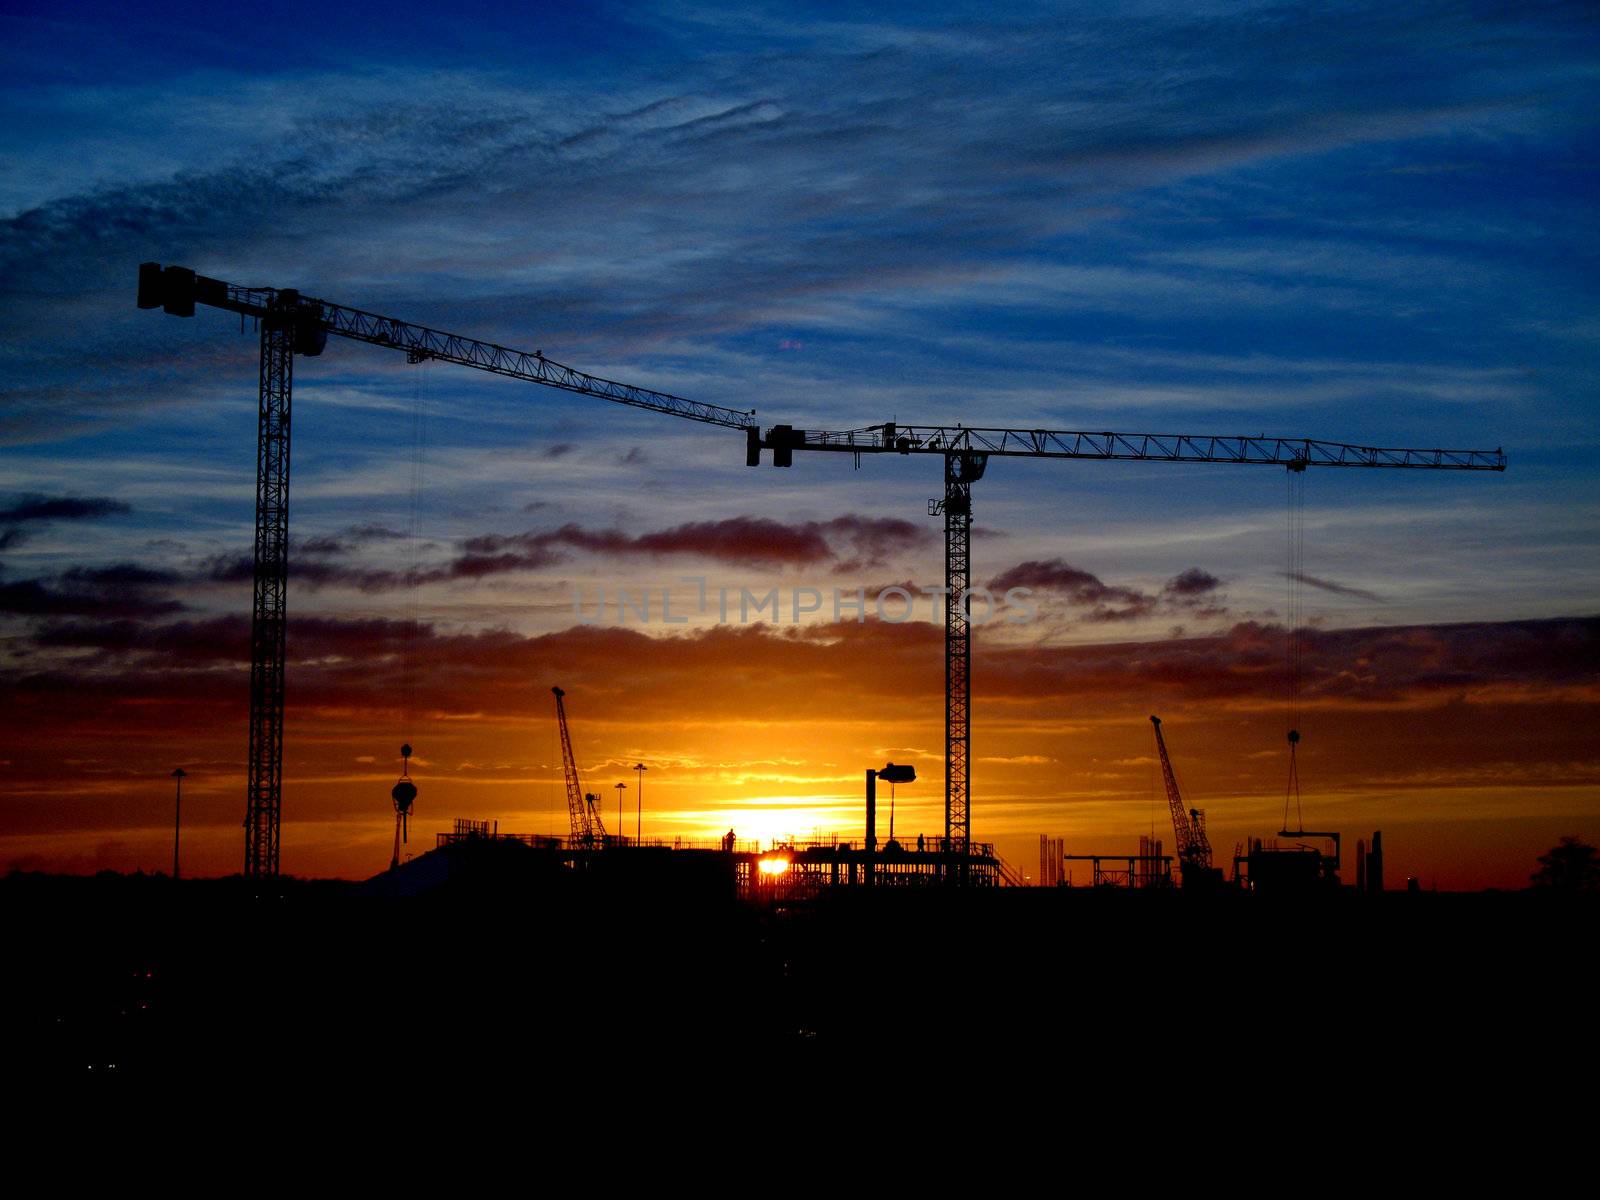 Cranes and evening sky by tommroch